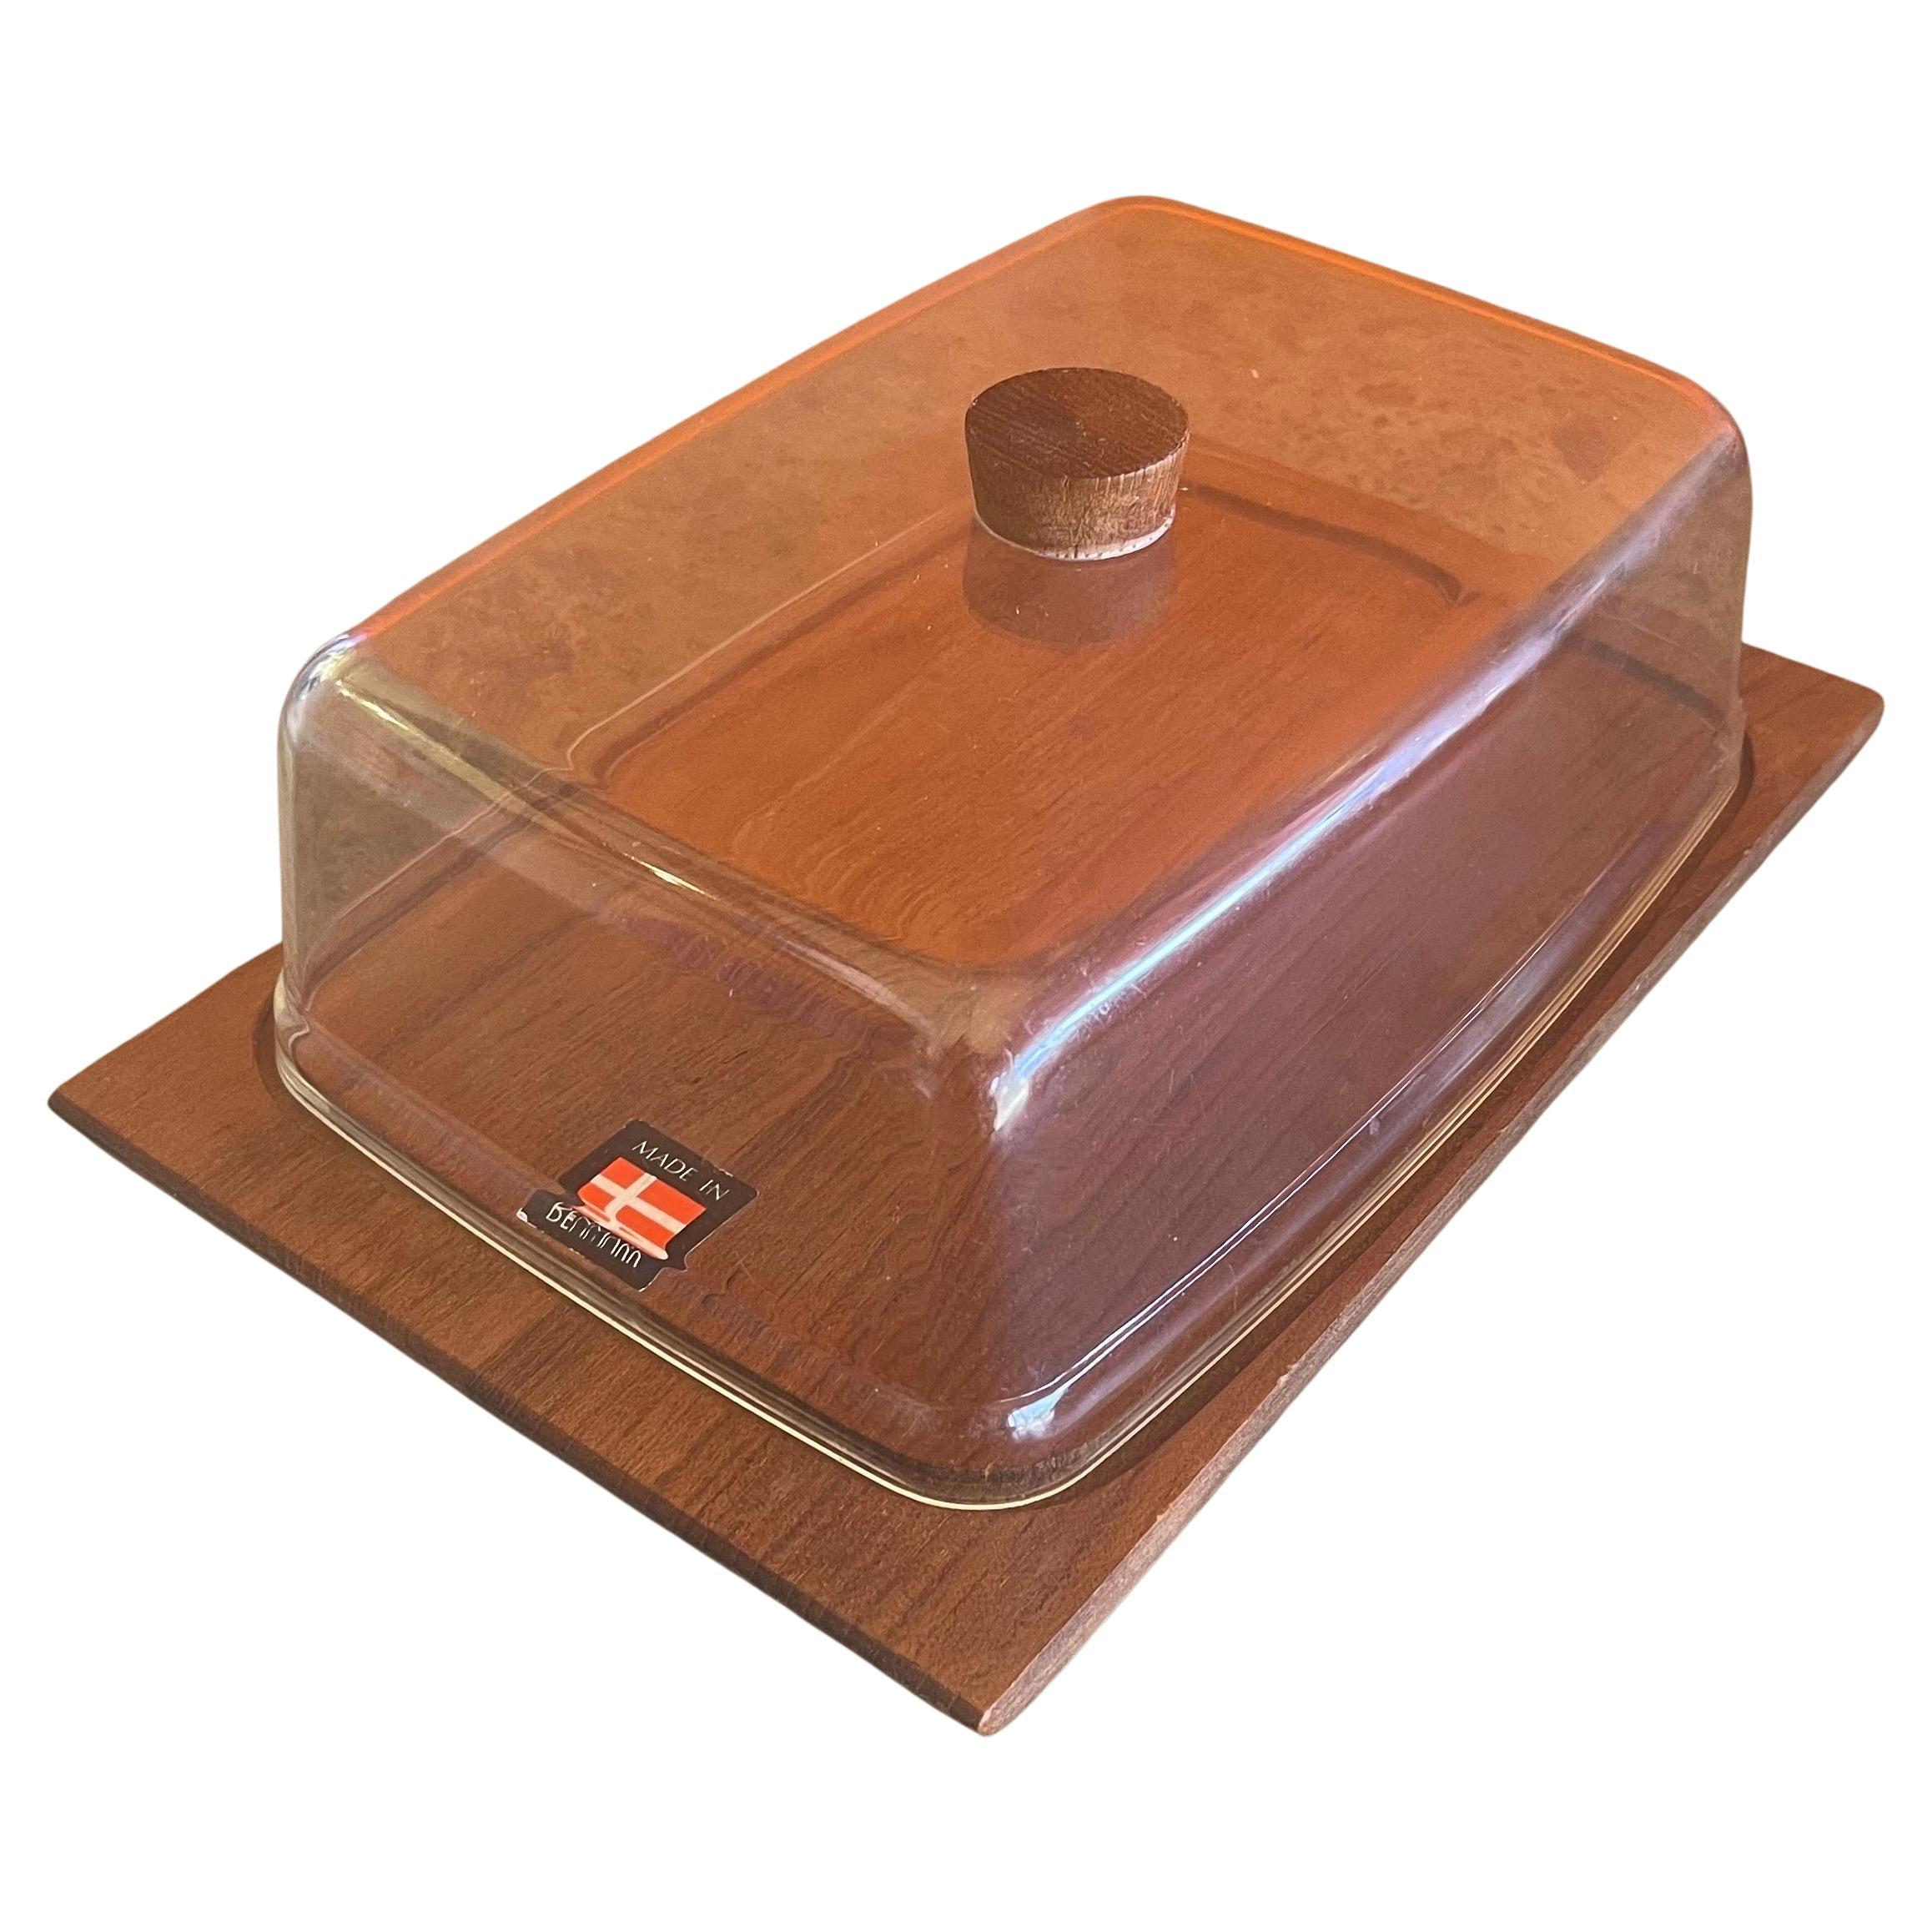 Danish Modern Teak Tray / Cheese Board with Dome Lid.ivnl__ For Sale